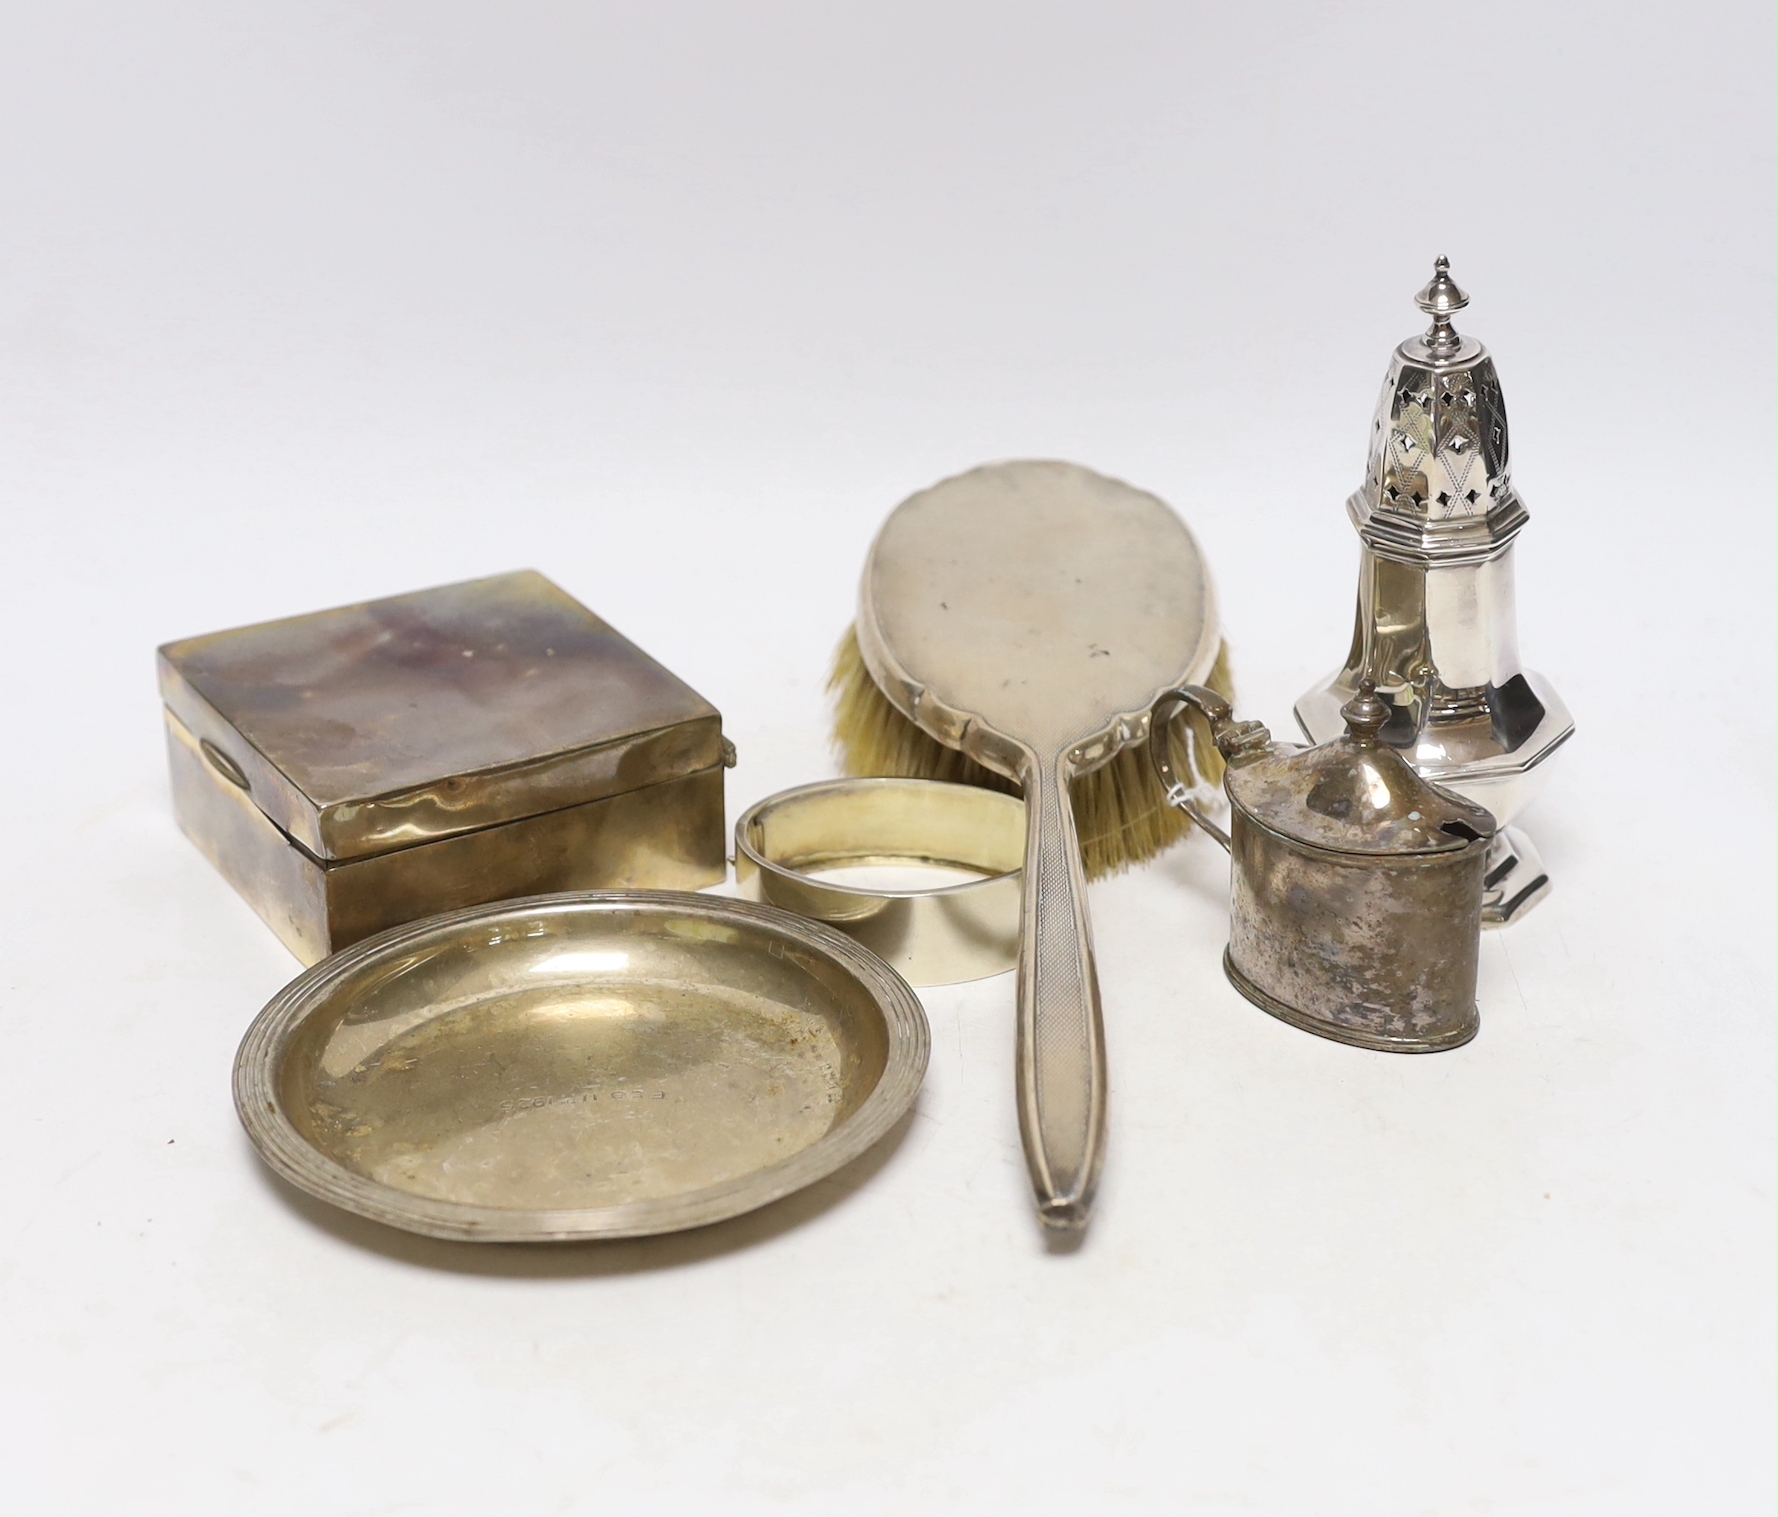 Sundry silver including a mounted hair brush, cigarette box, small dish, bangle, caster and mustard.                                                                                                                        